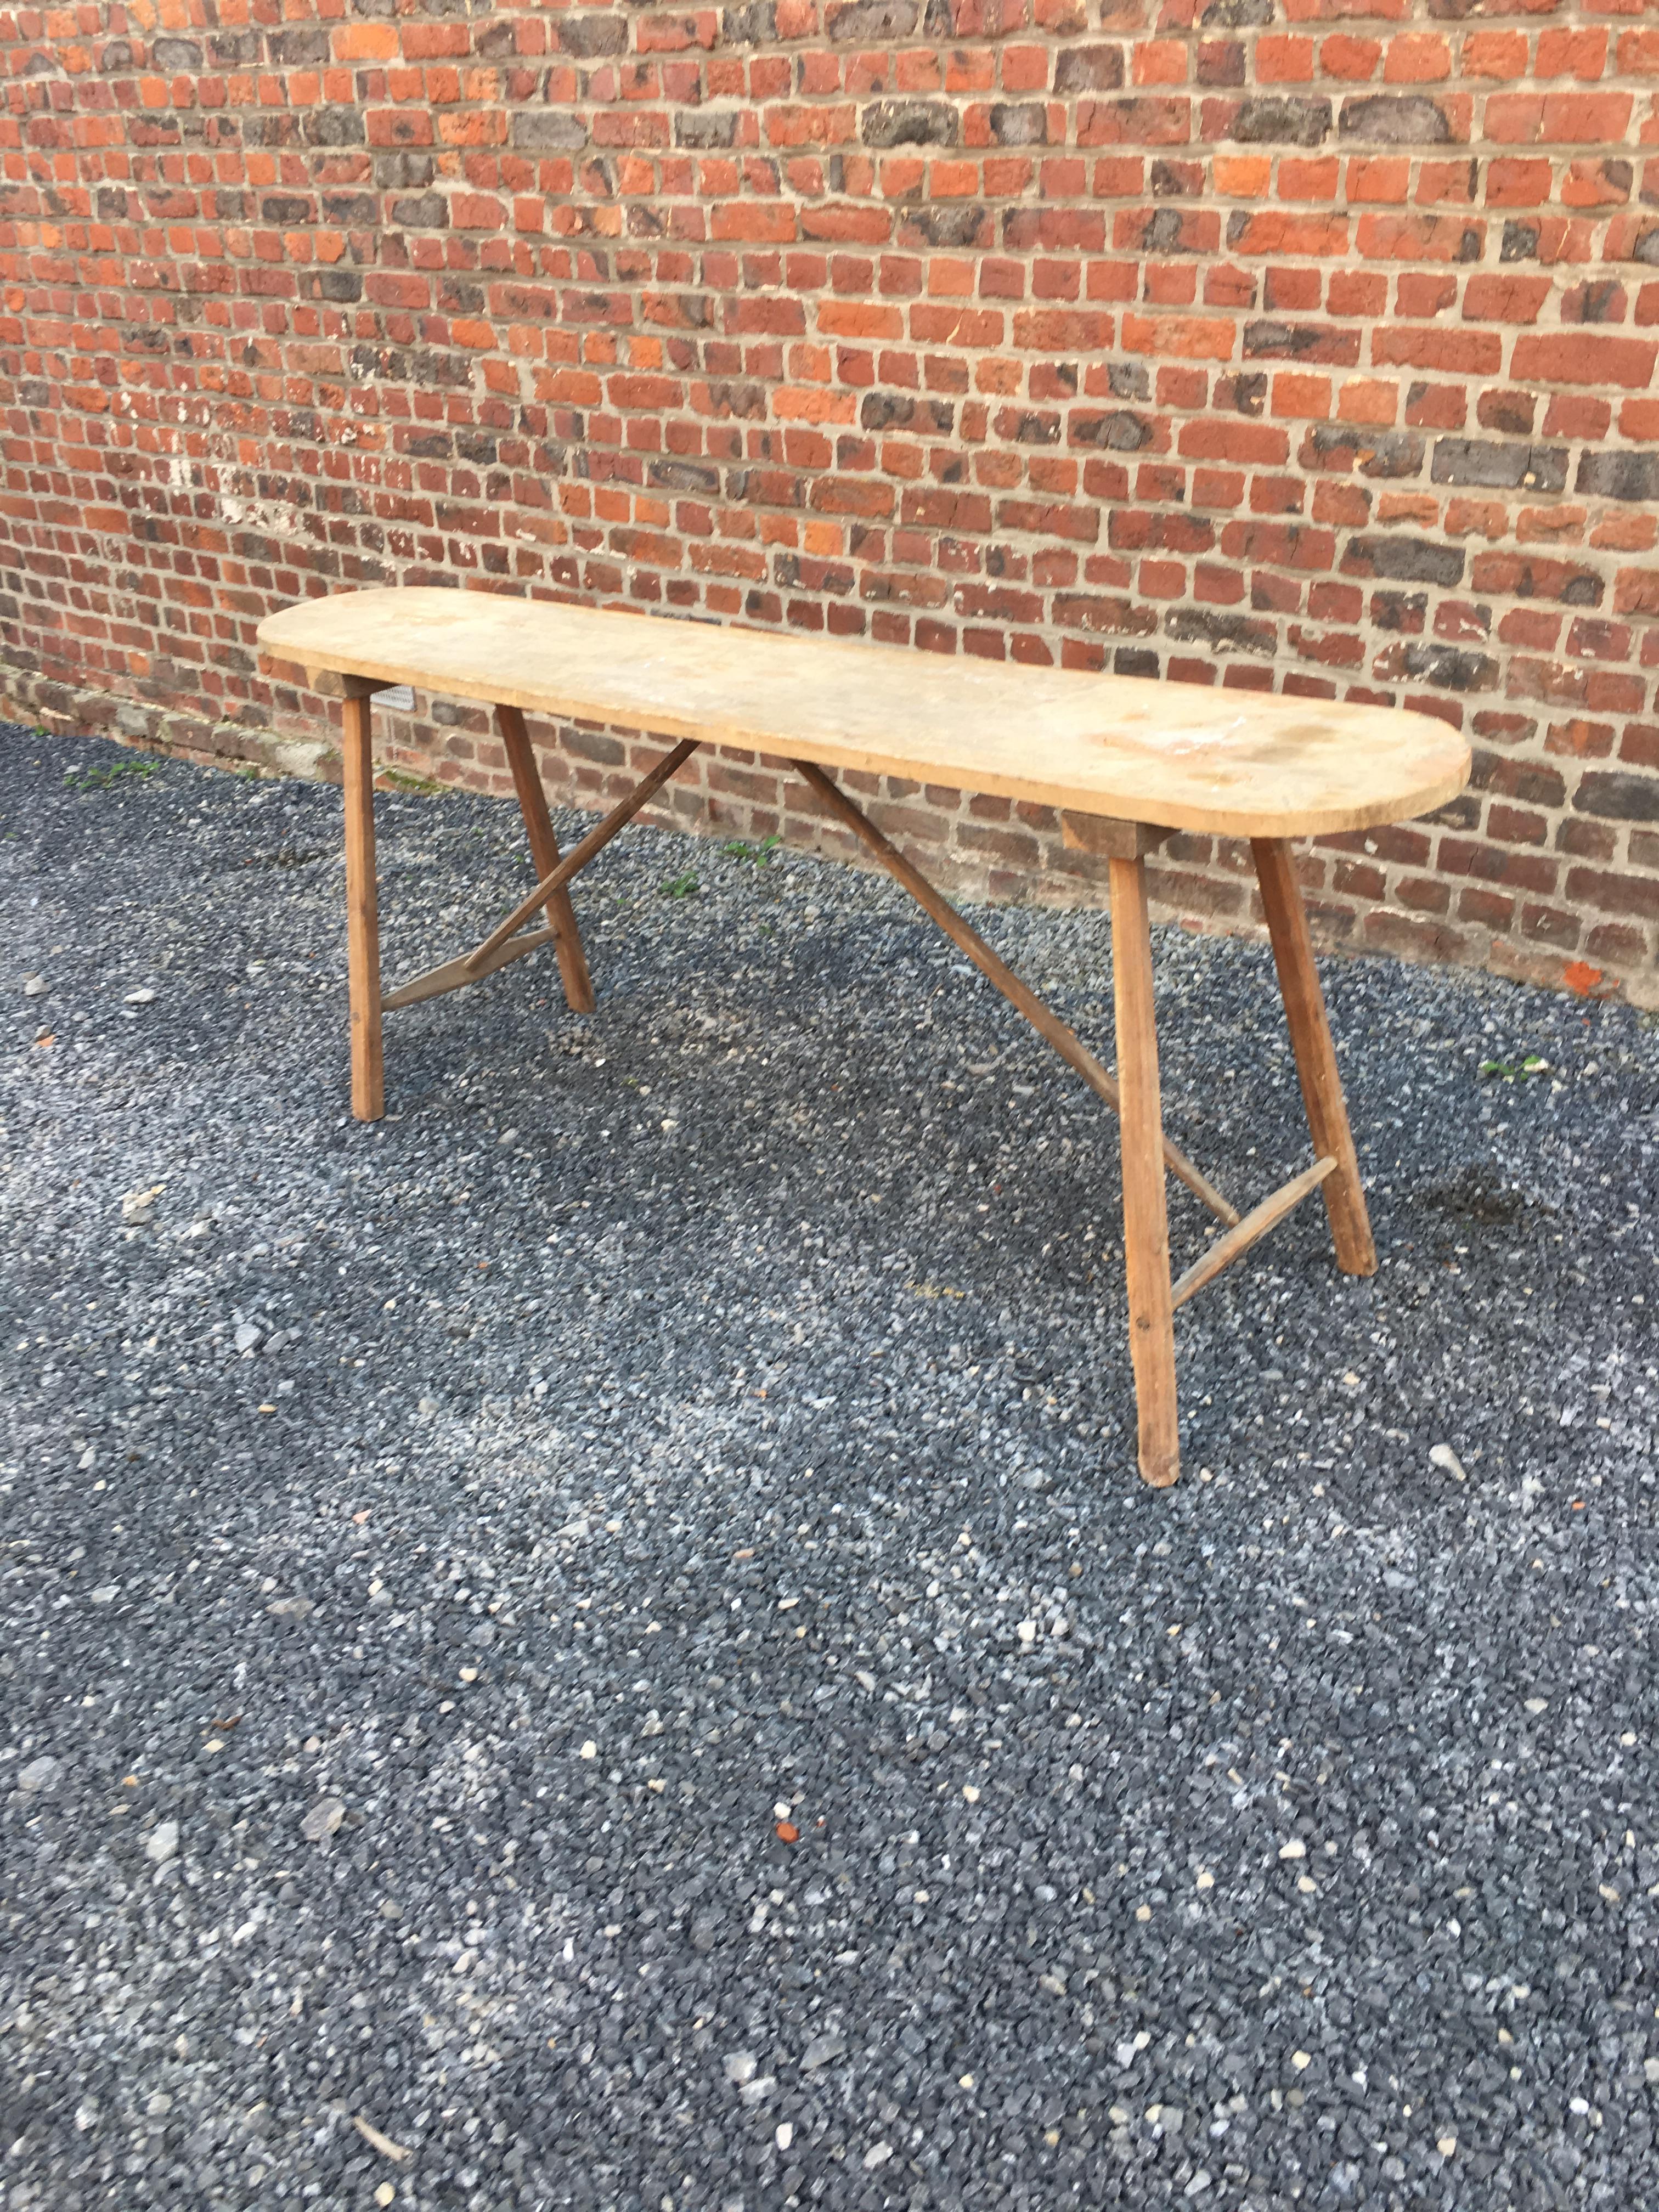 Brutalist wooden console table, circa 1930.
Old washerwoman's table.